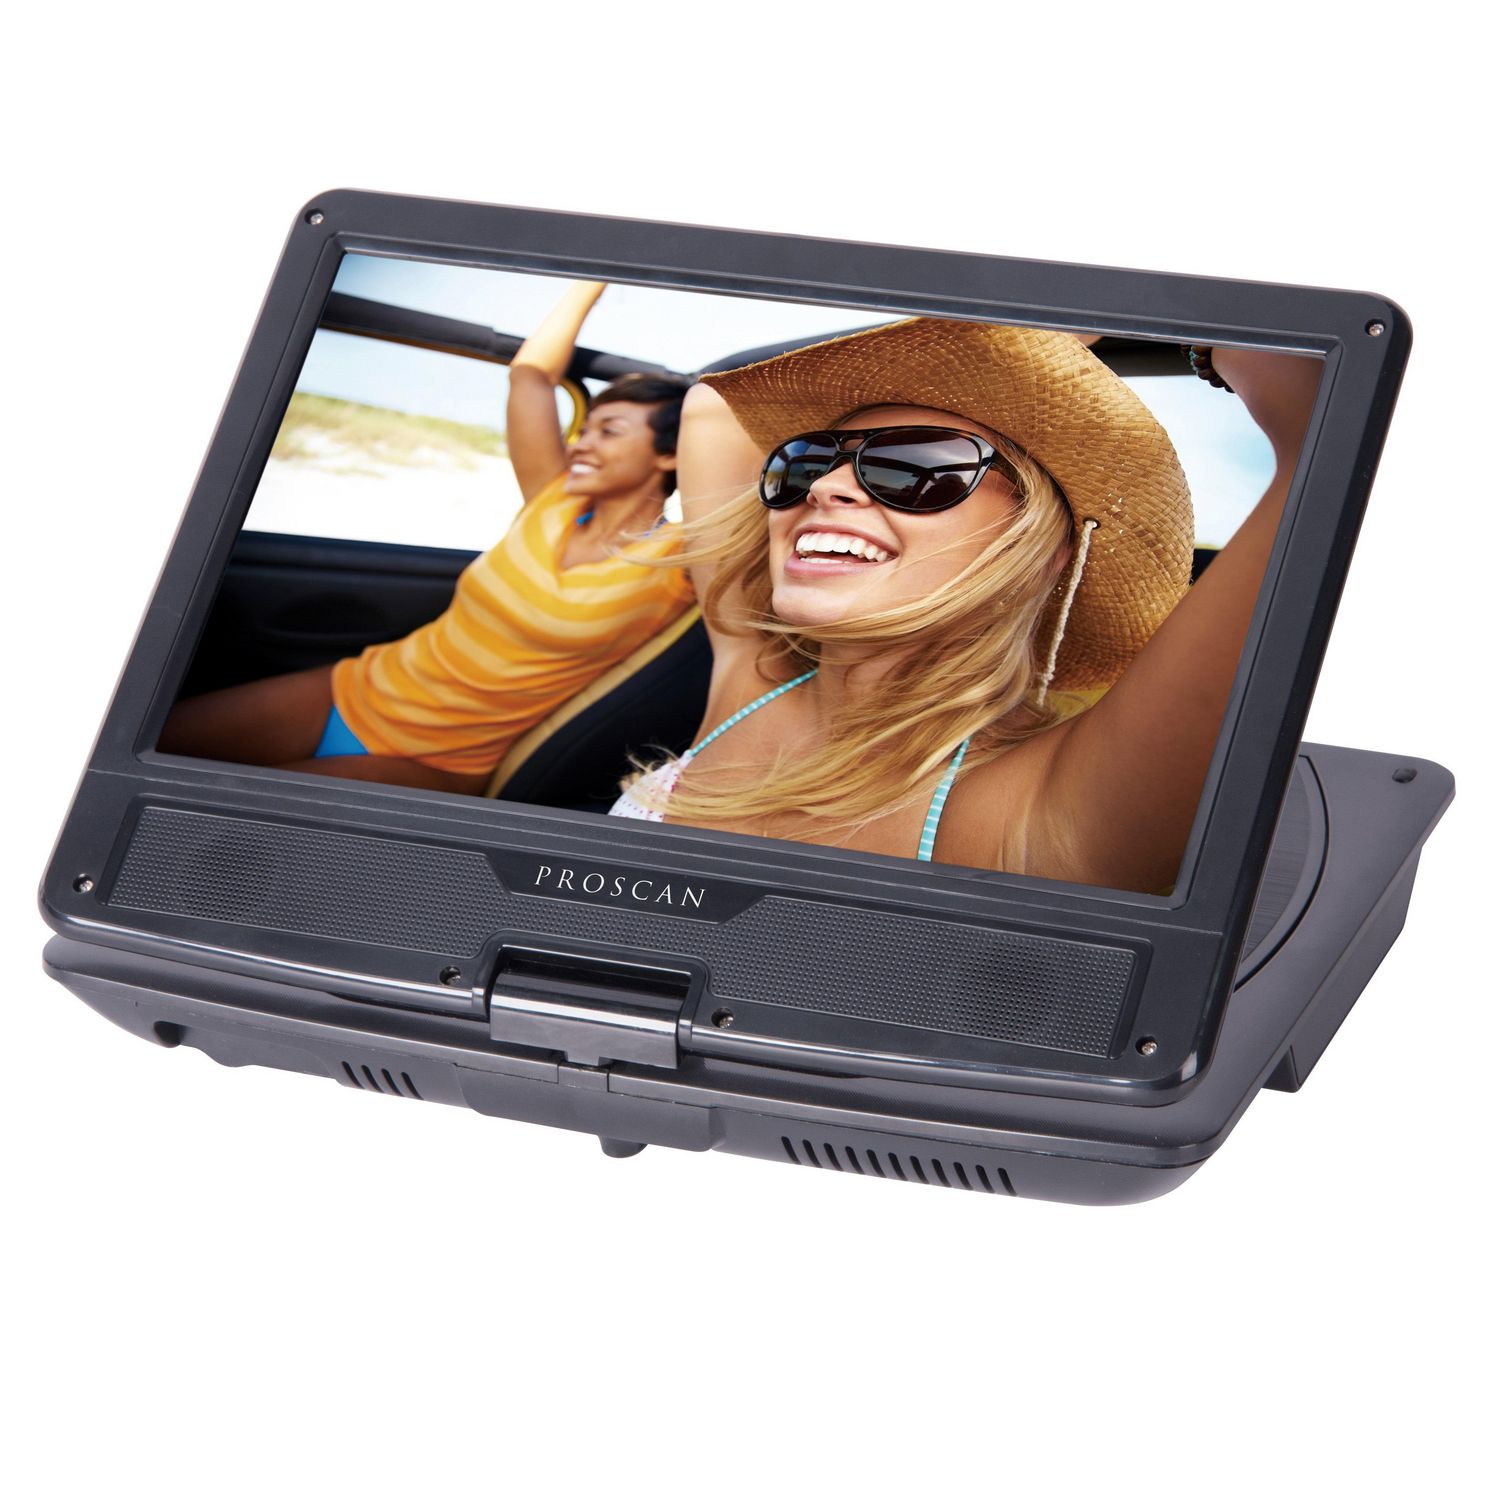 Proscan 10-in Portable DVD Player Black, Screen swivels up to 180° 